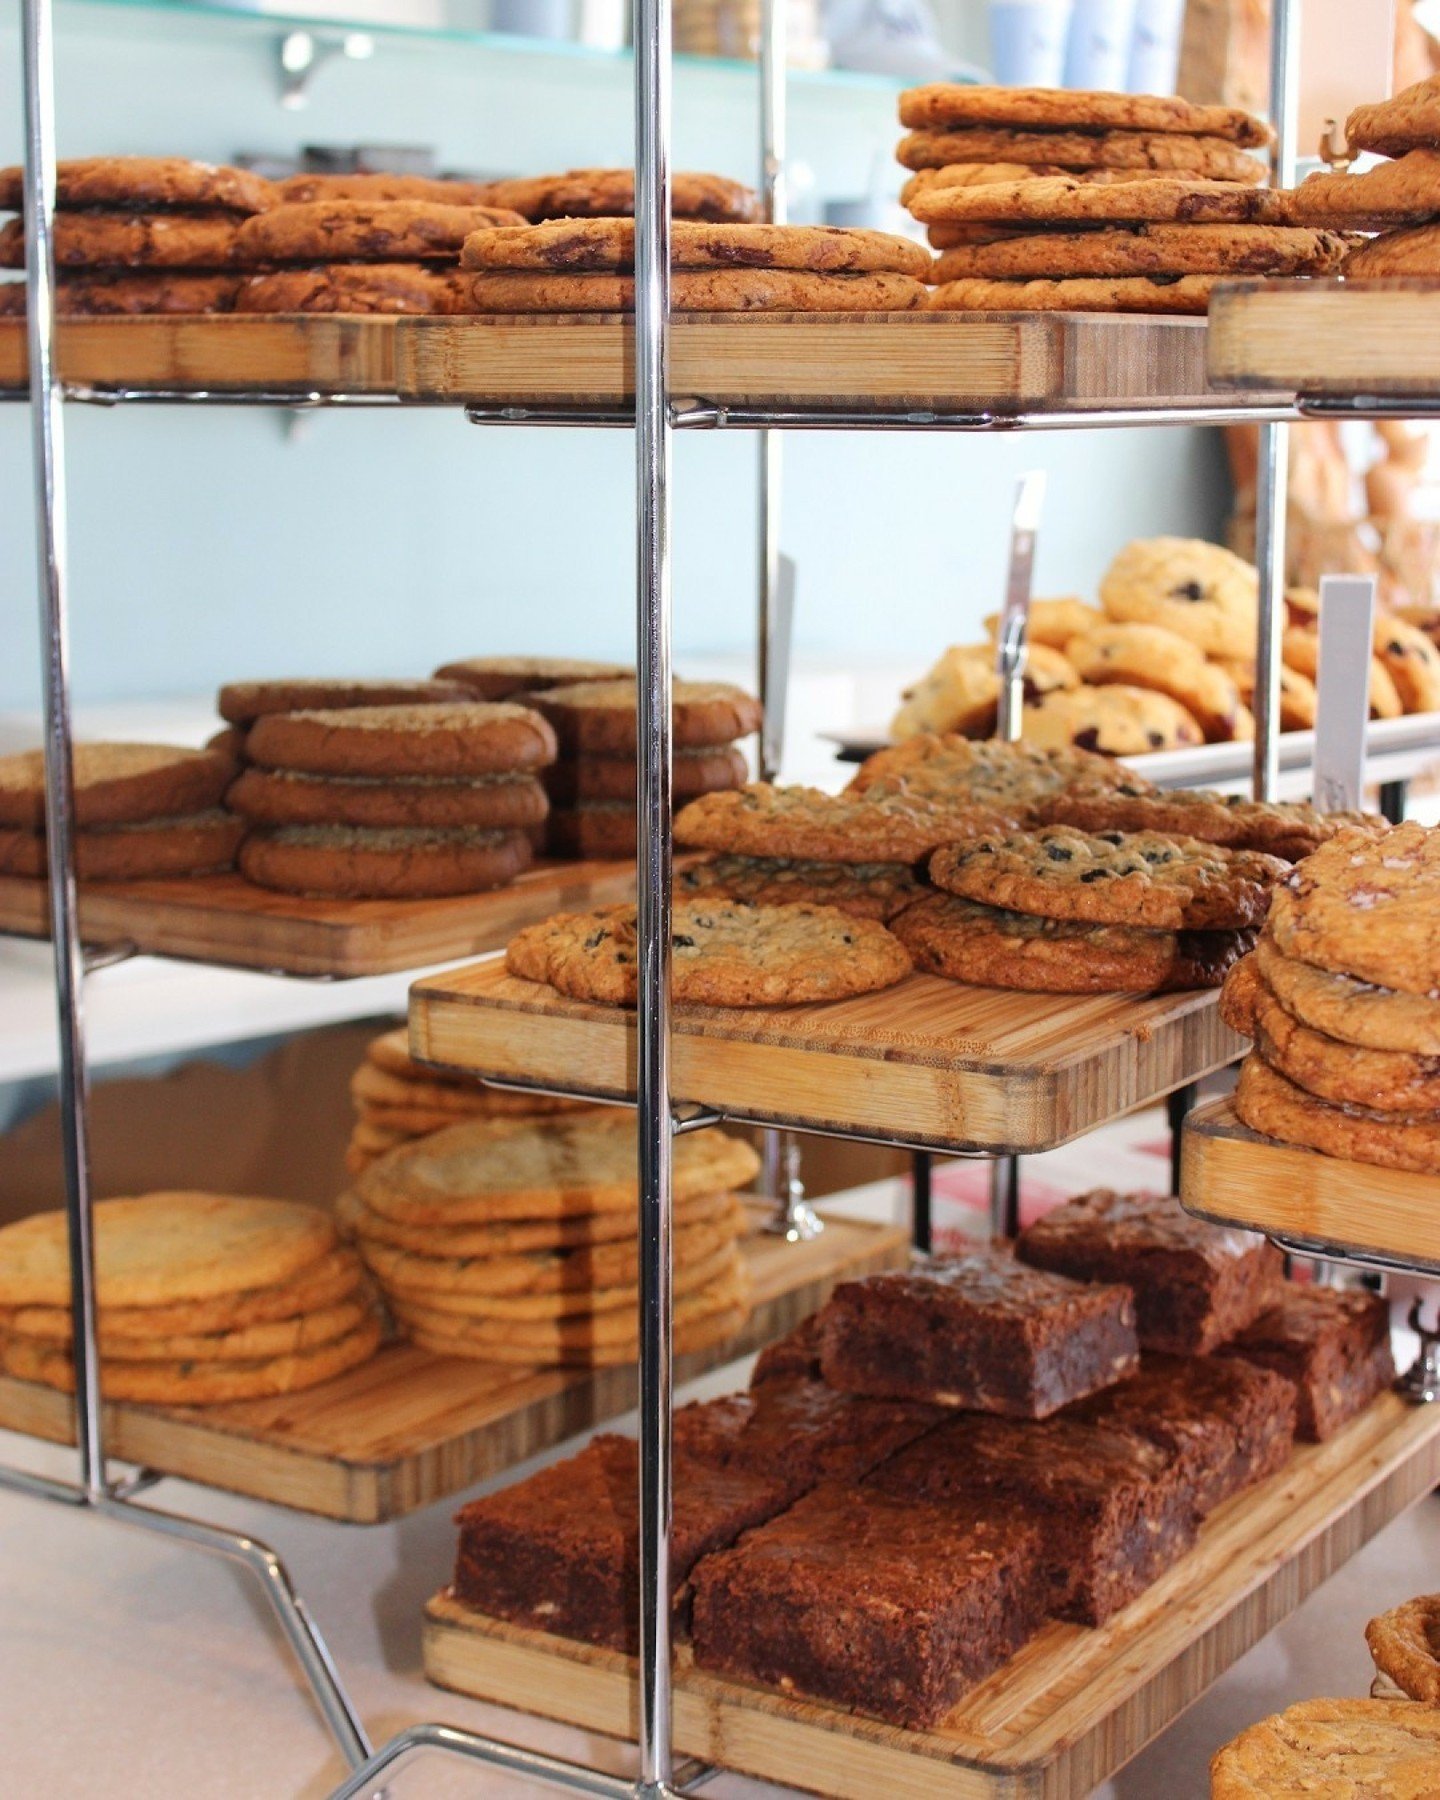 Which cookie will you be having today at Sift Niantic? 😍 

*
*
*
*
*
#atyhospitality #siftmystic #siftniantic #siftwatchill #siftbakeshop #mysticct #downtownmystic #ct #pastrychef